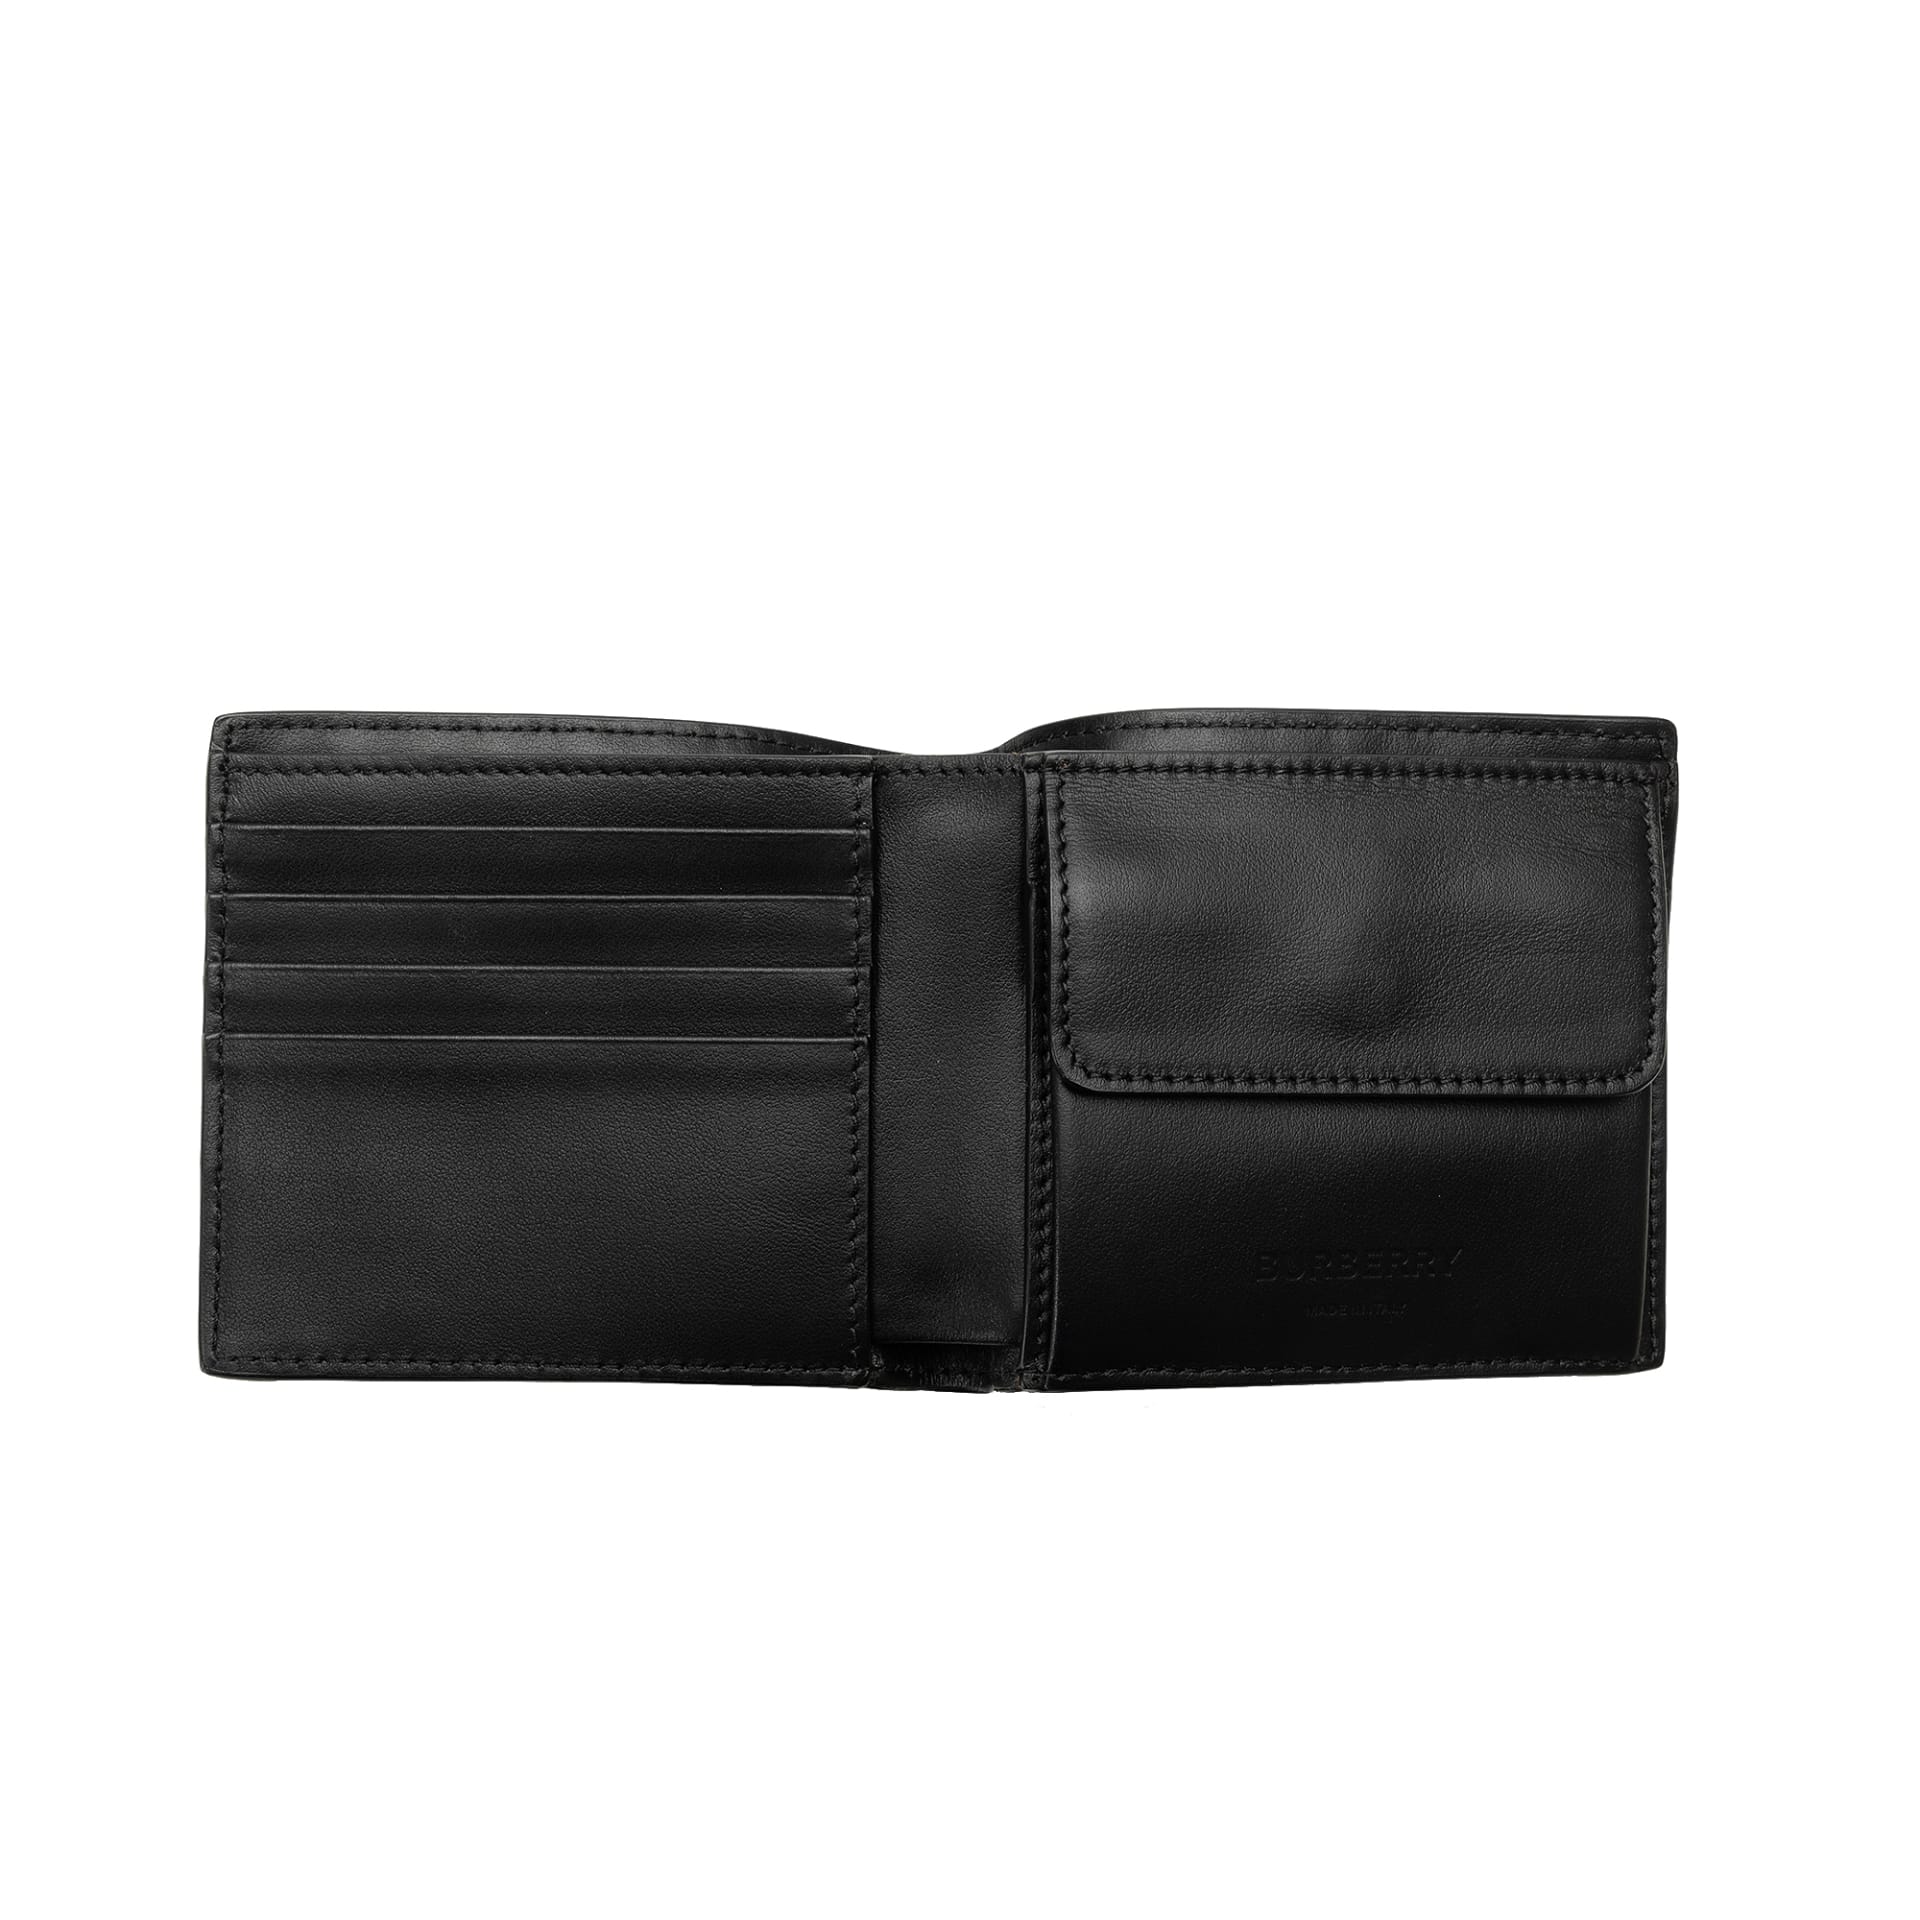 Burberry Tb Embossed Leather Bifold Wallet